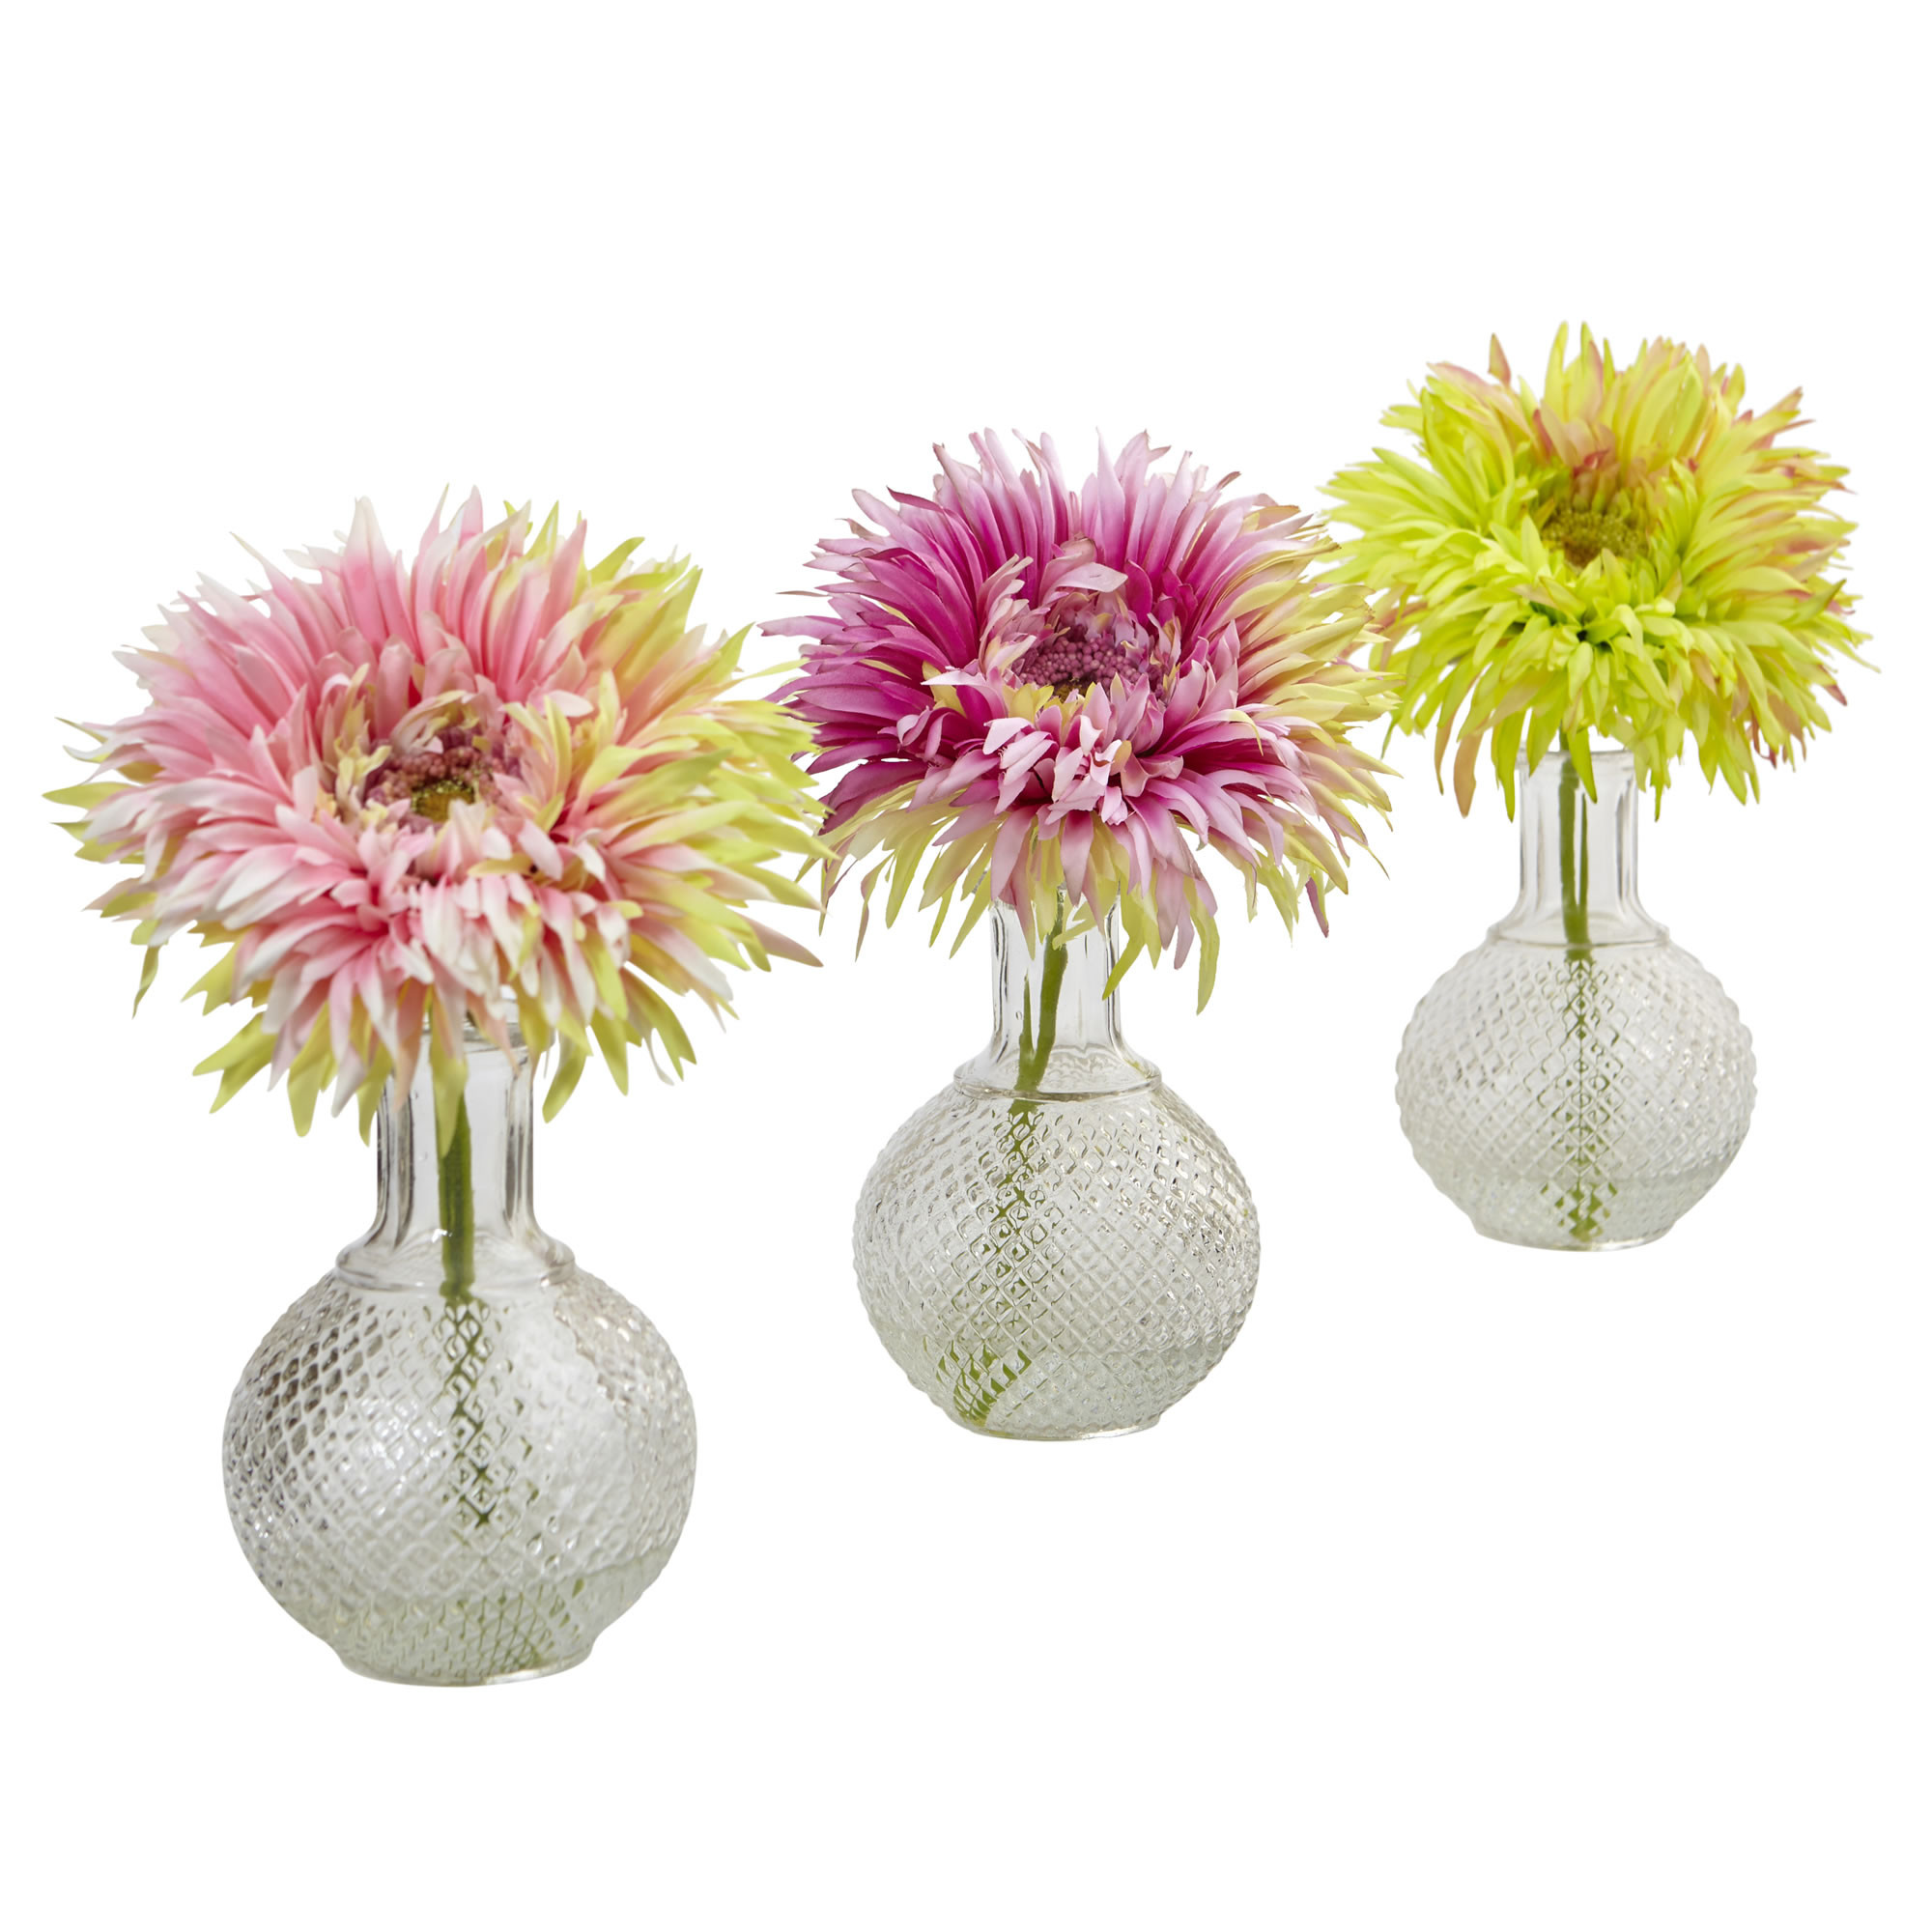 25 Elegant 3 Piece Glass Vase Set 2024 free download 3 piece glass vase set of daisy with glass vase set of 3 nearly natural pertaining to daisy with glass vase set of 3